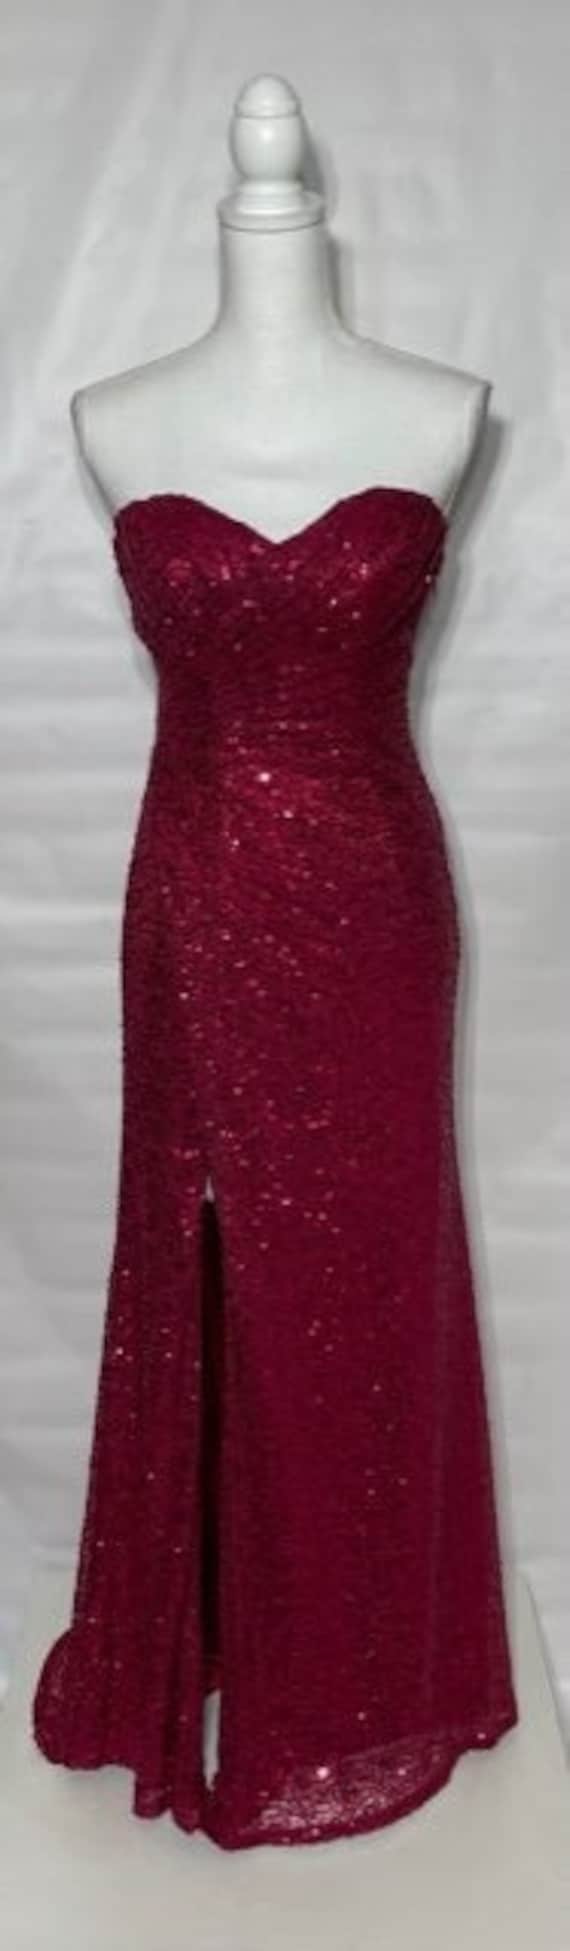 La Femme Red Strapless Sequin Gown. Size 2